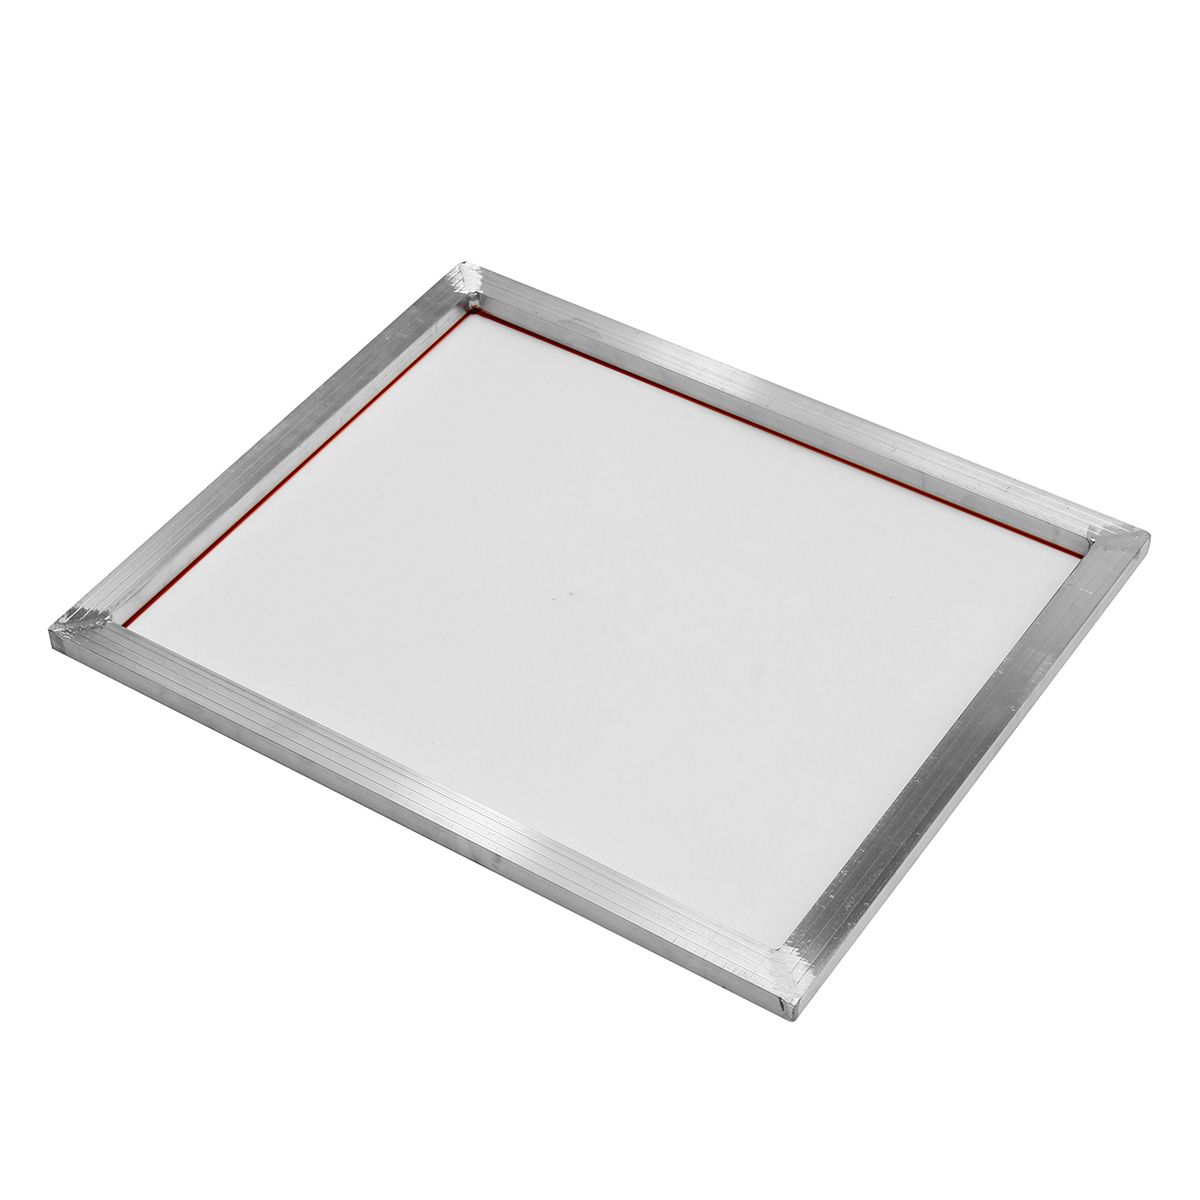 160-Mesh-Silk-Screen-Printing-Screen-With-Aluminum-Frame-White-Polyester-1450324